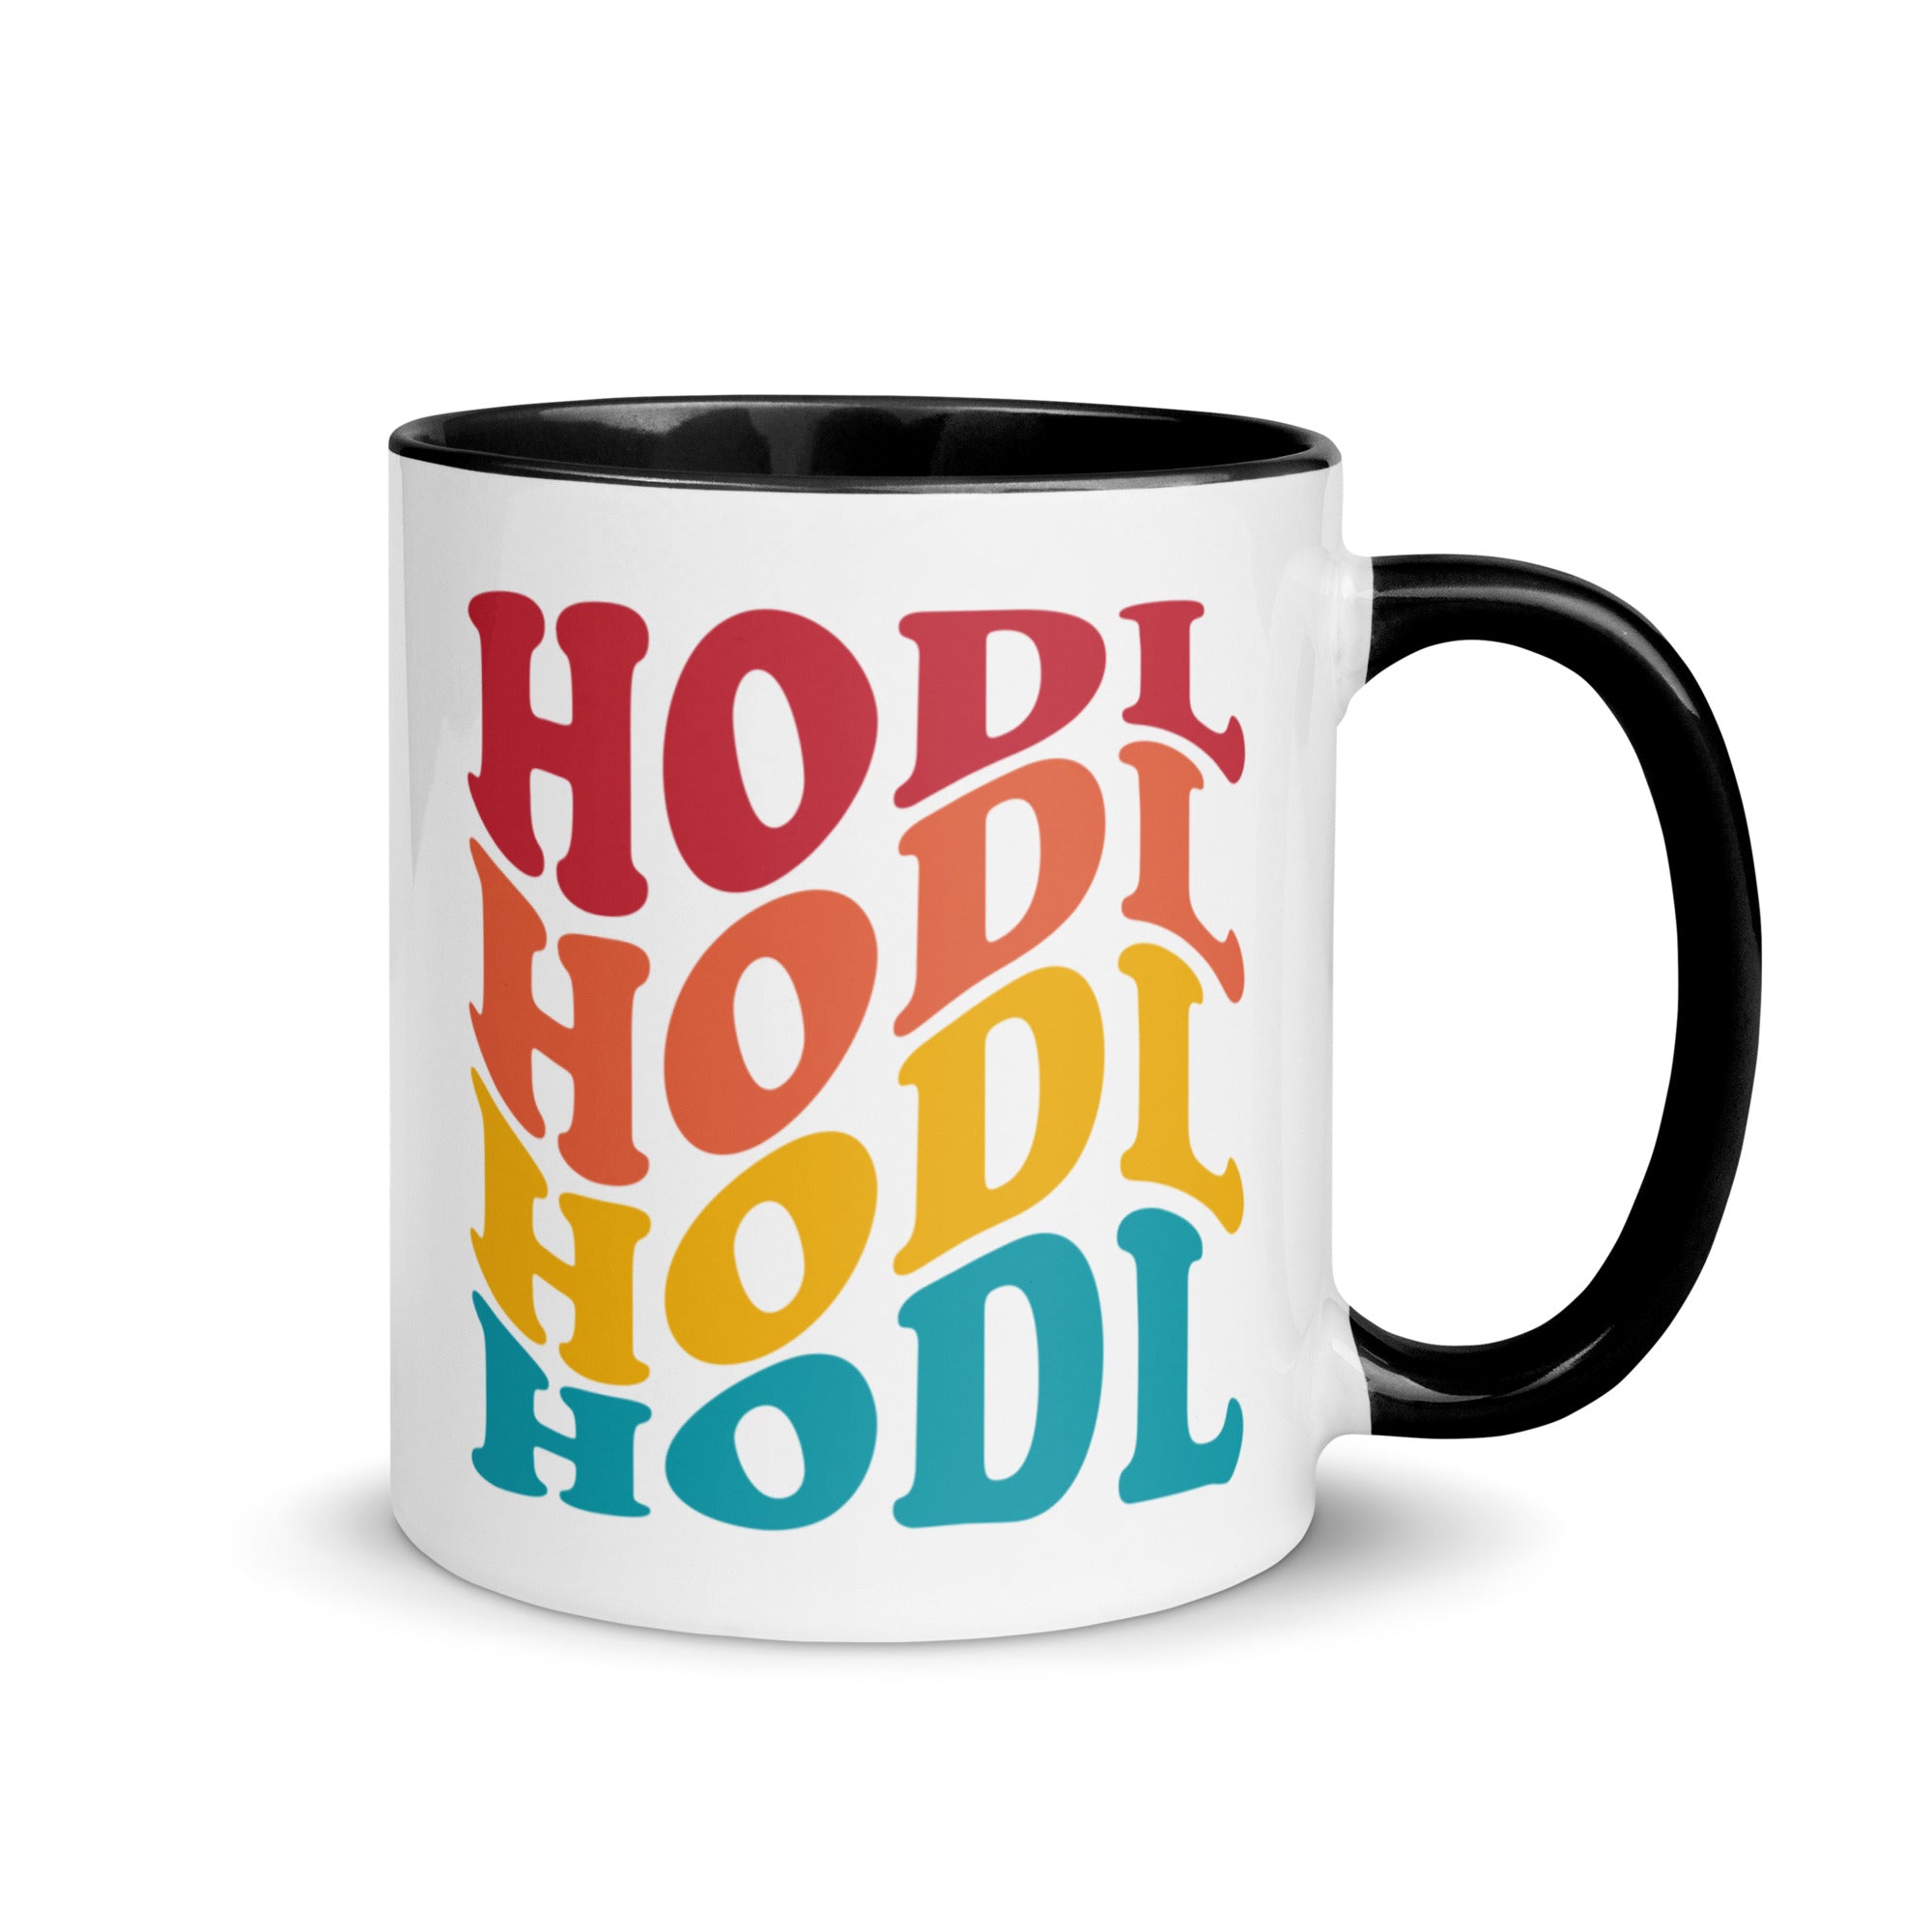 Gifts for Crypto Lovers - HODL Mug. Right handle view.